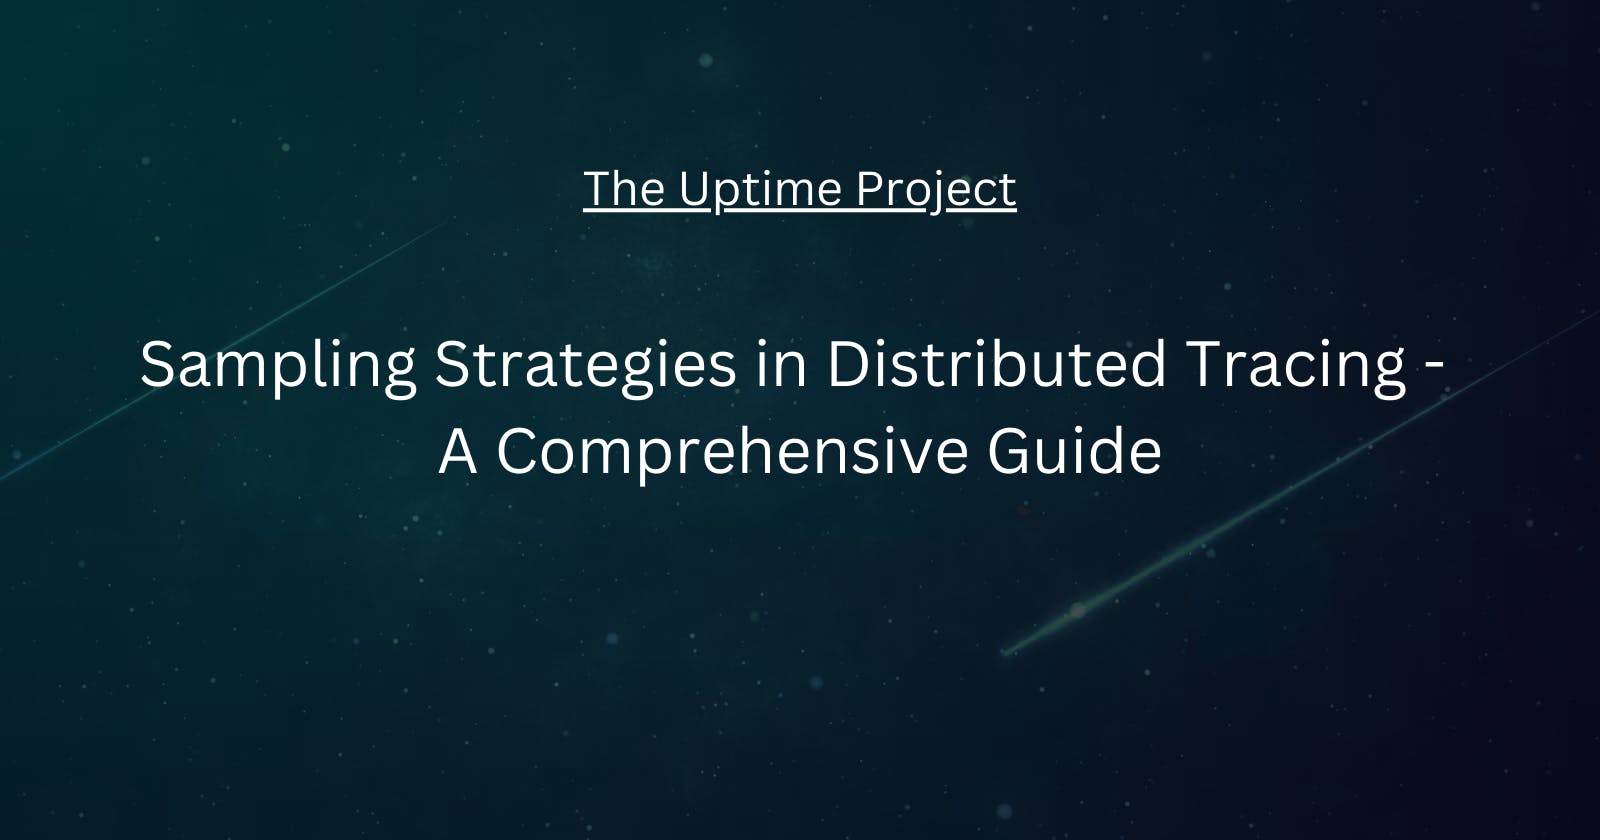 Sampling Strategies in Distributed Tracing - A Comprehensive Guide